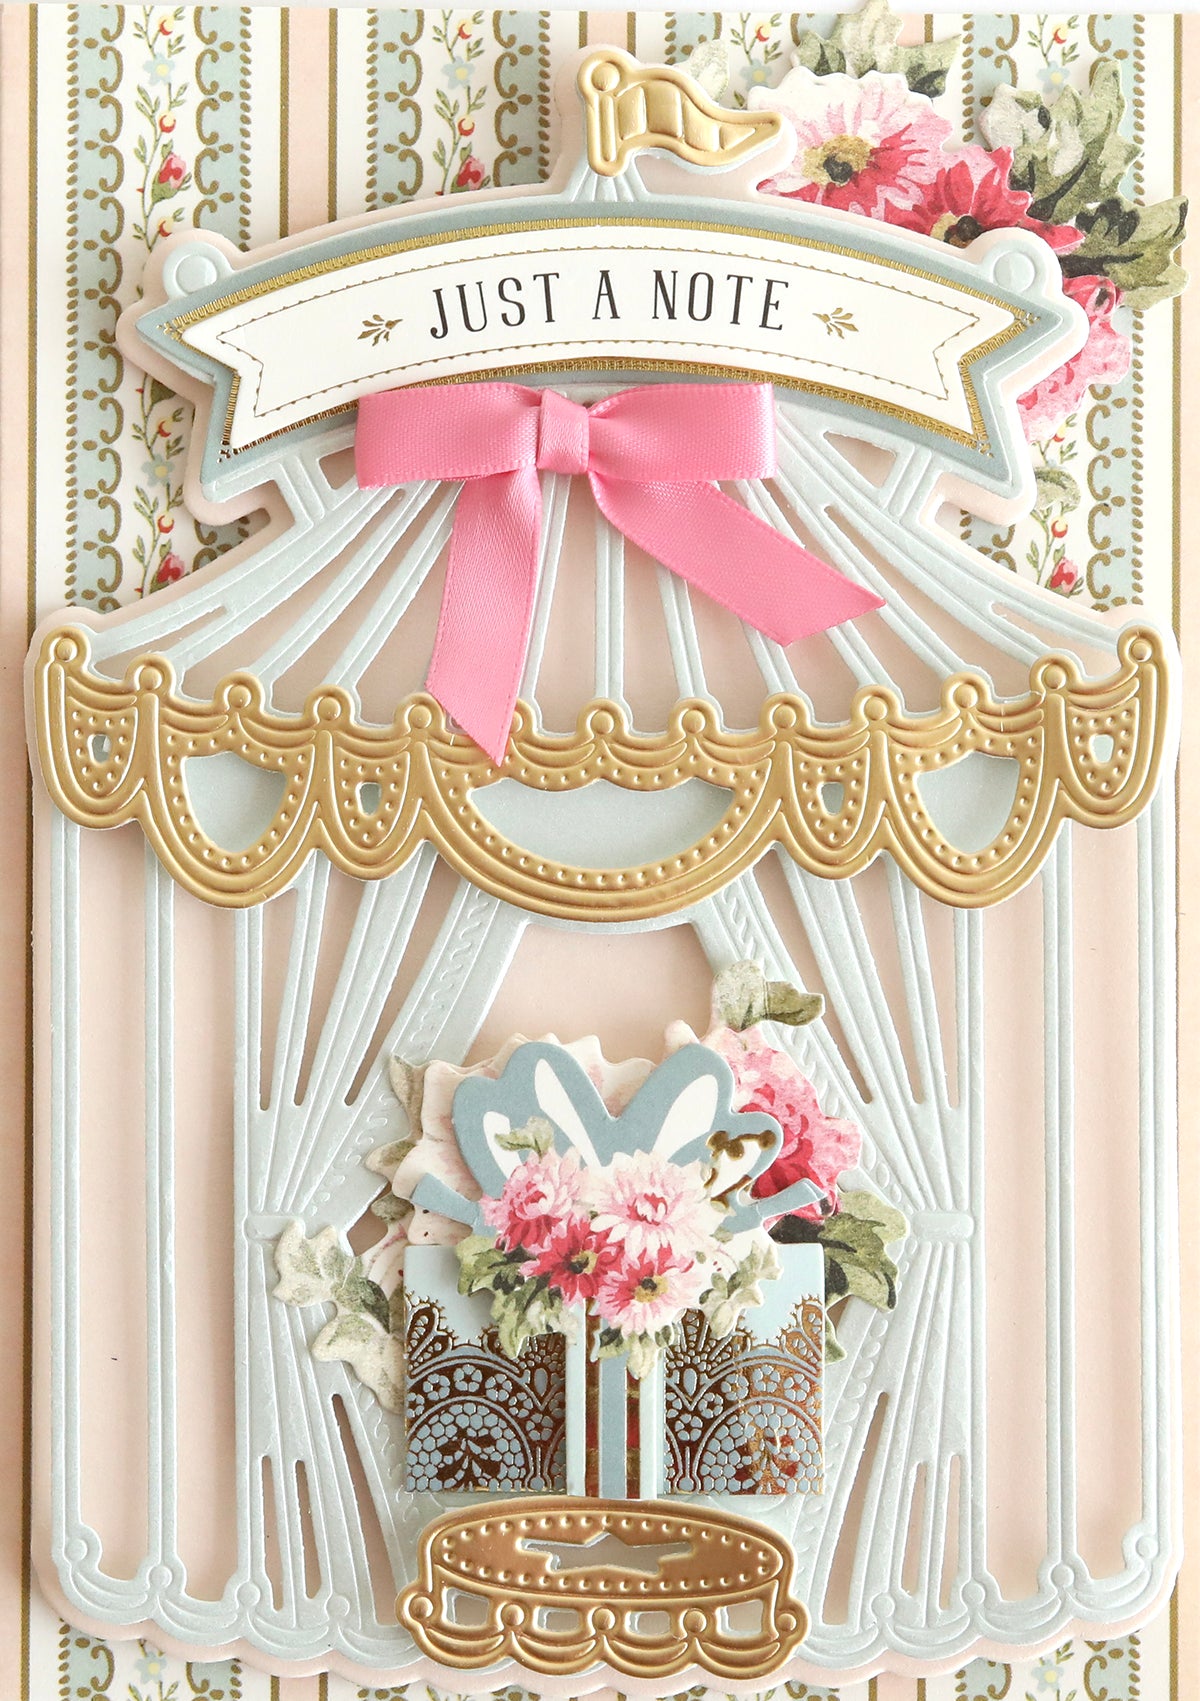 Decorative greeting card with a vintage birdcage design, floral embellishments, and a "just a note" banner, crafted with the 3D Circus Tent Dies die set.